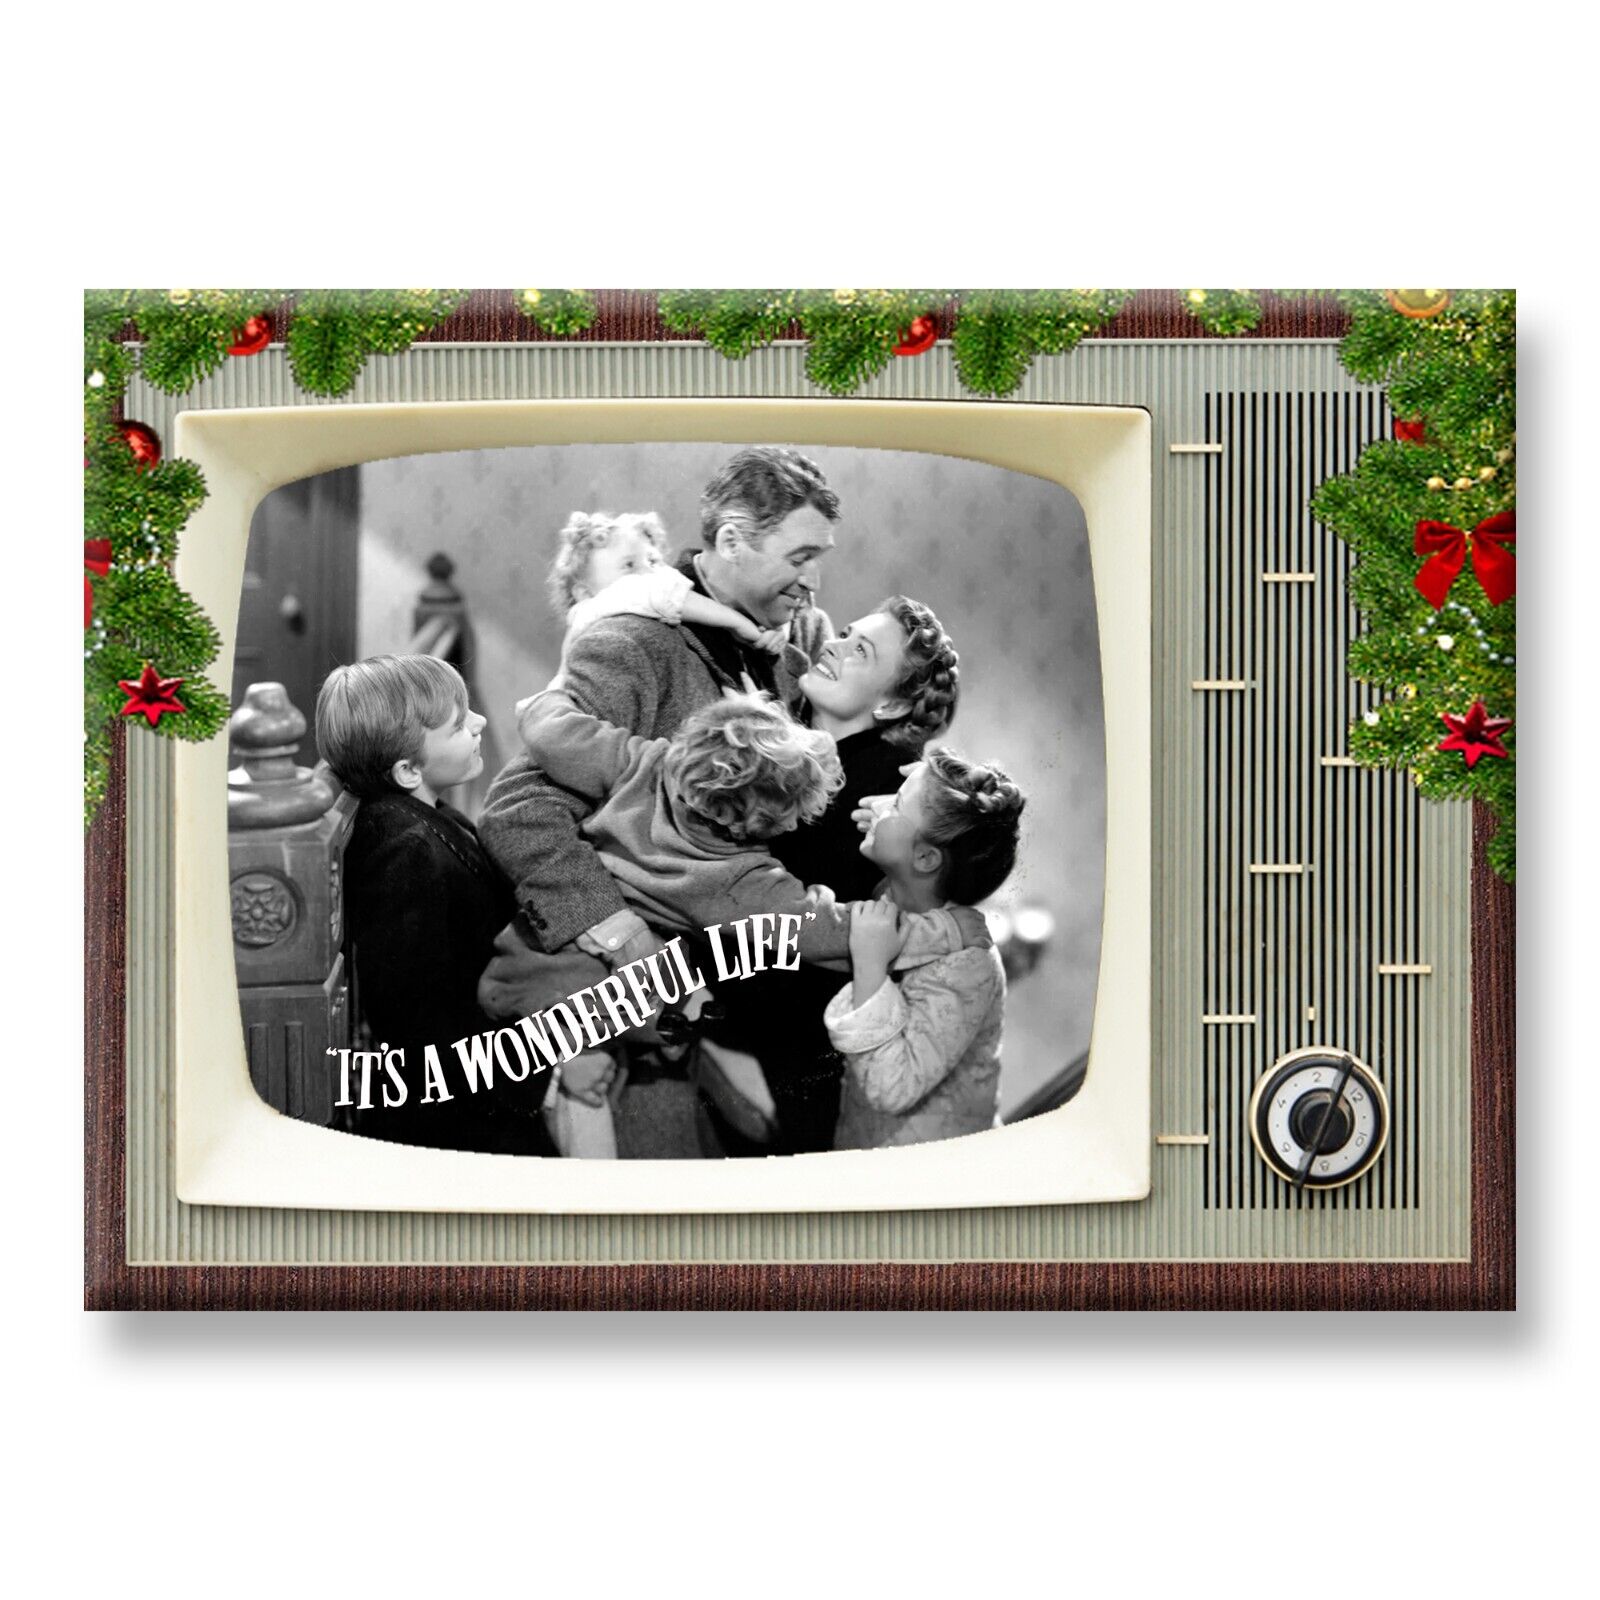 Its a Wonderful Life Retro TV 3.5 inches x 2.5 inches Steel Fridge Magnet